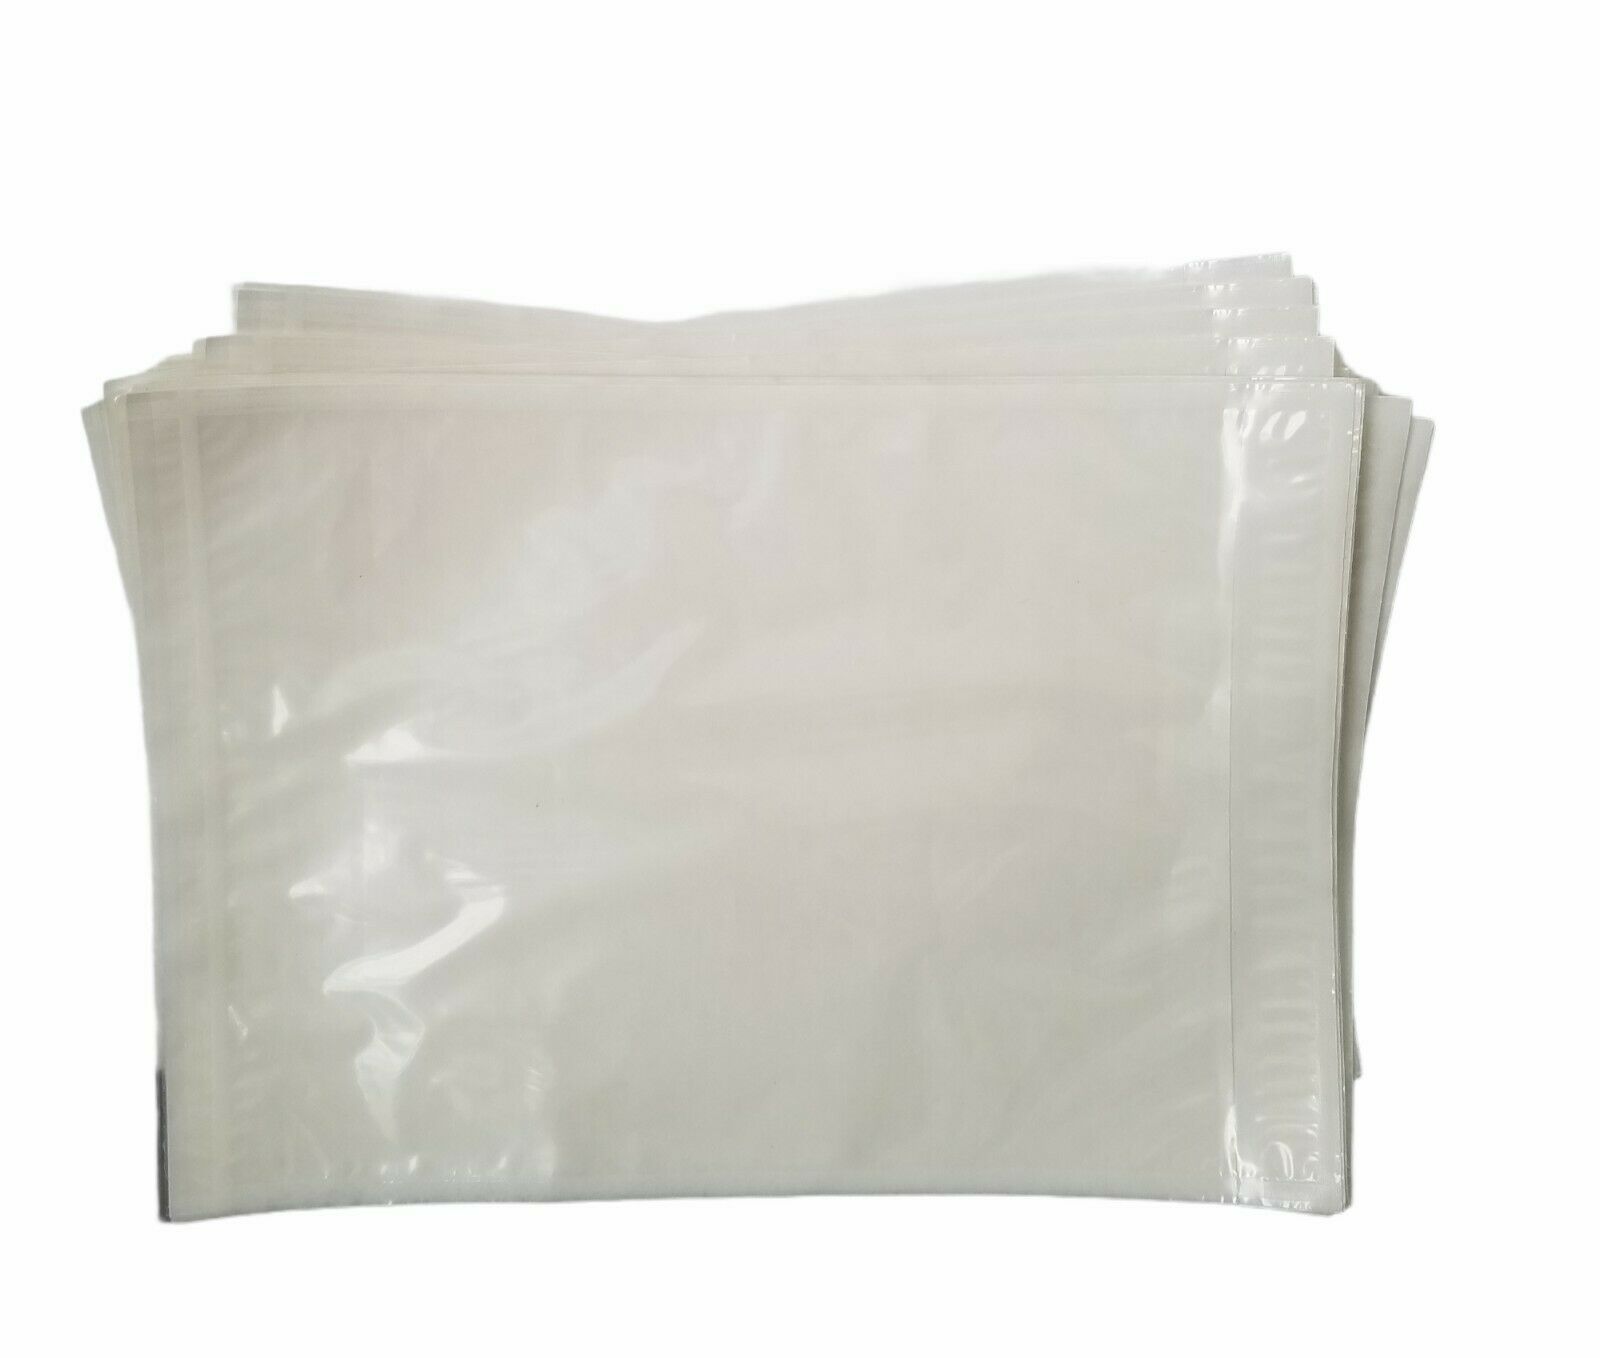 250 pcs Shipping Mailing Label Pouch 10" x 7" 